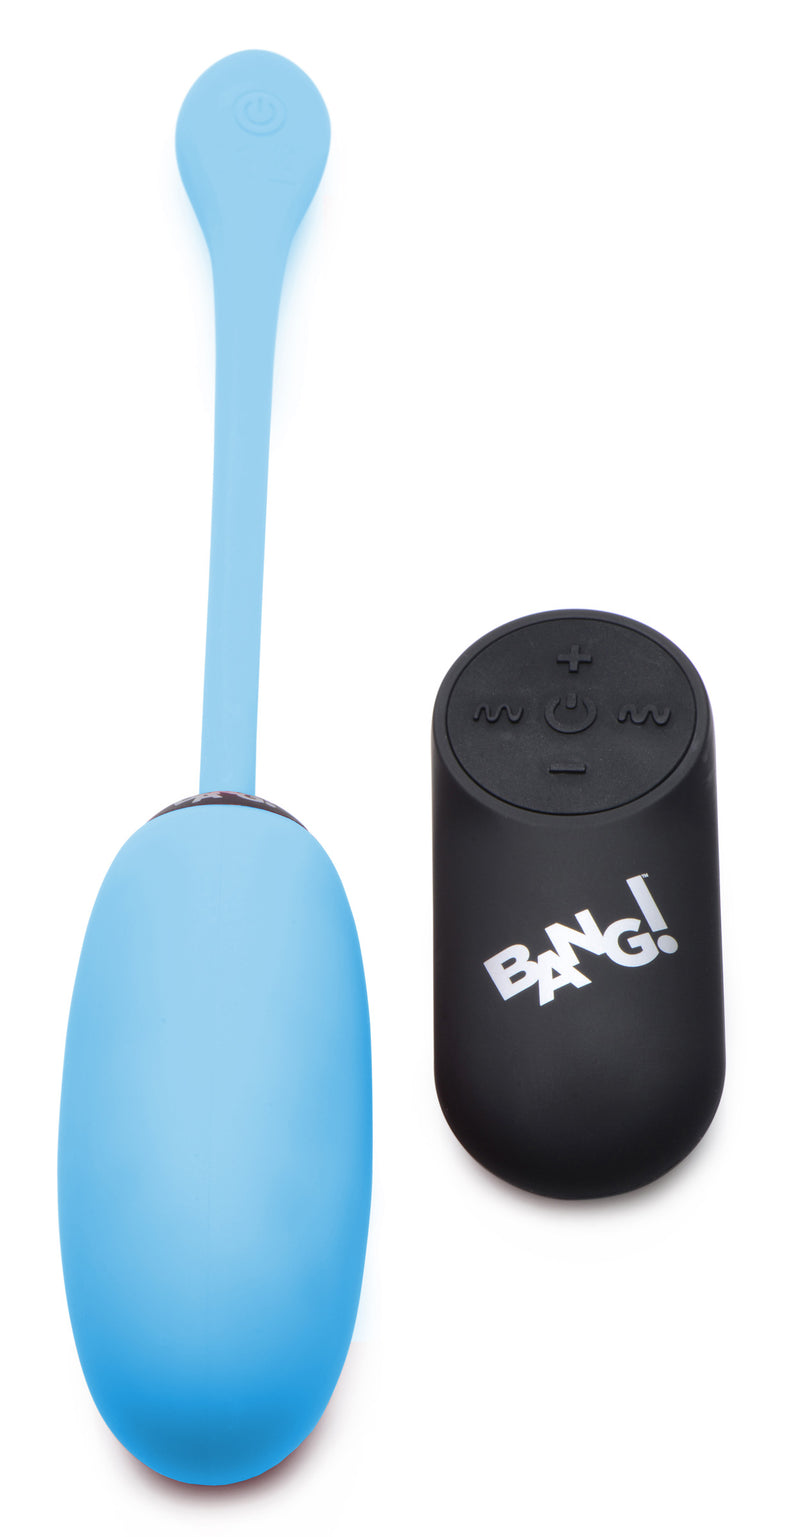 Remote Control 28X Silicone Plush Egg - Blue bullet-vibrators from Bang